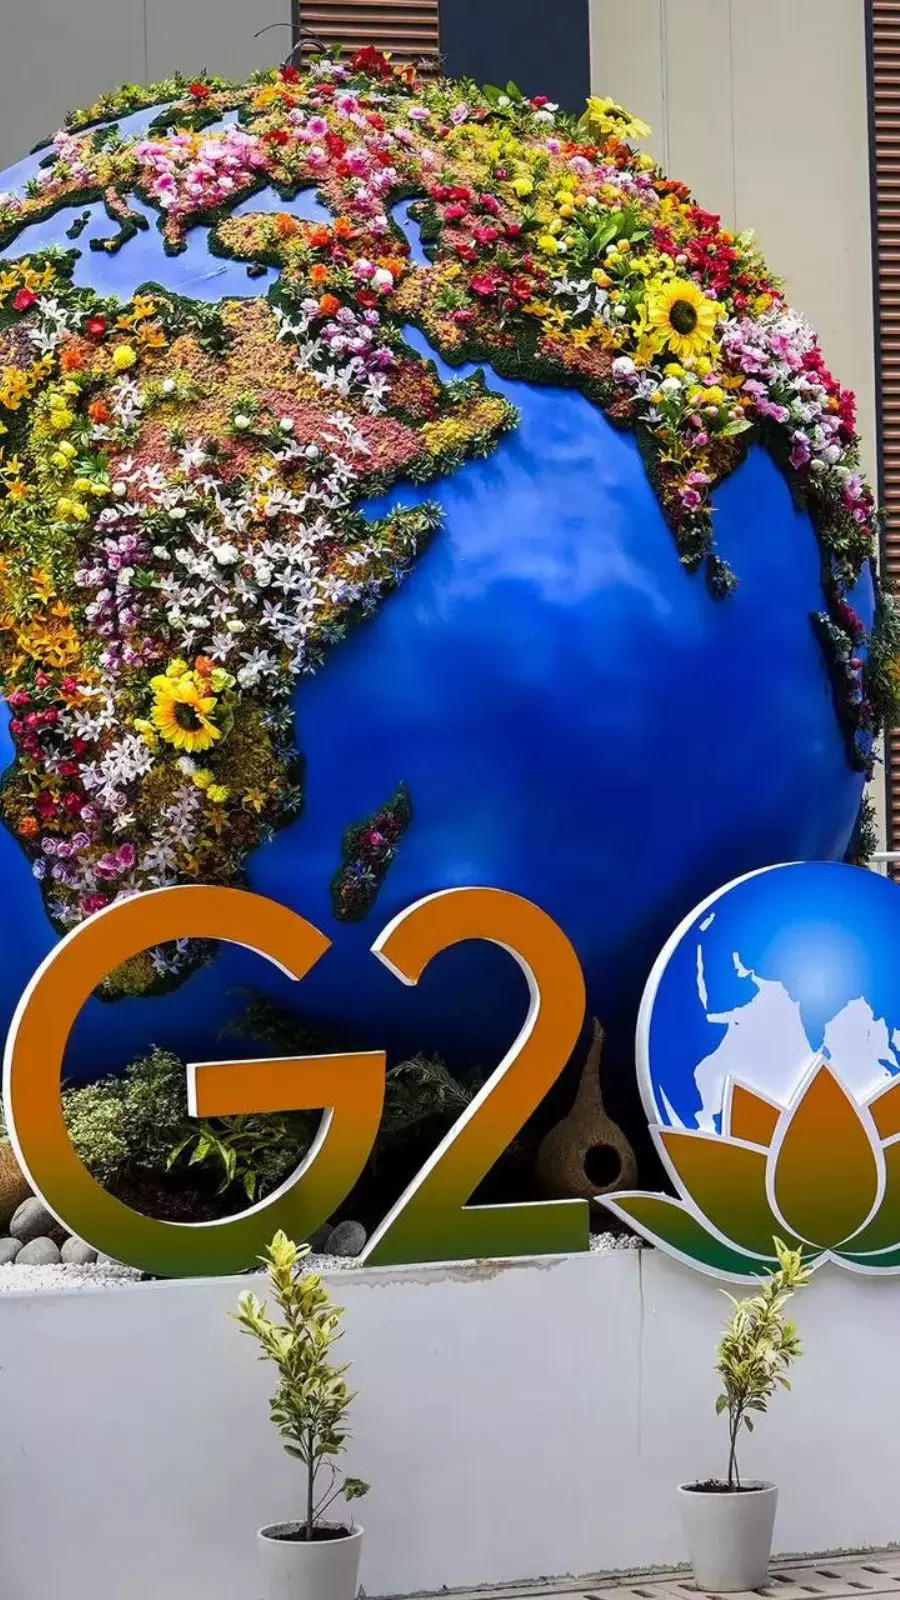 G20 Presidential Dinner: What's on the menu?